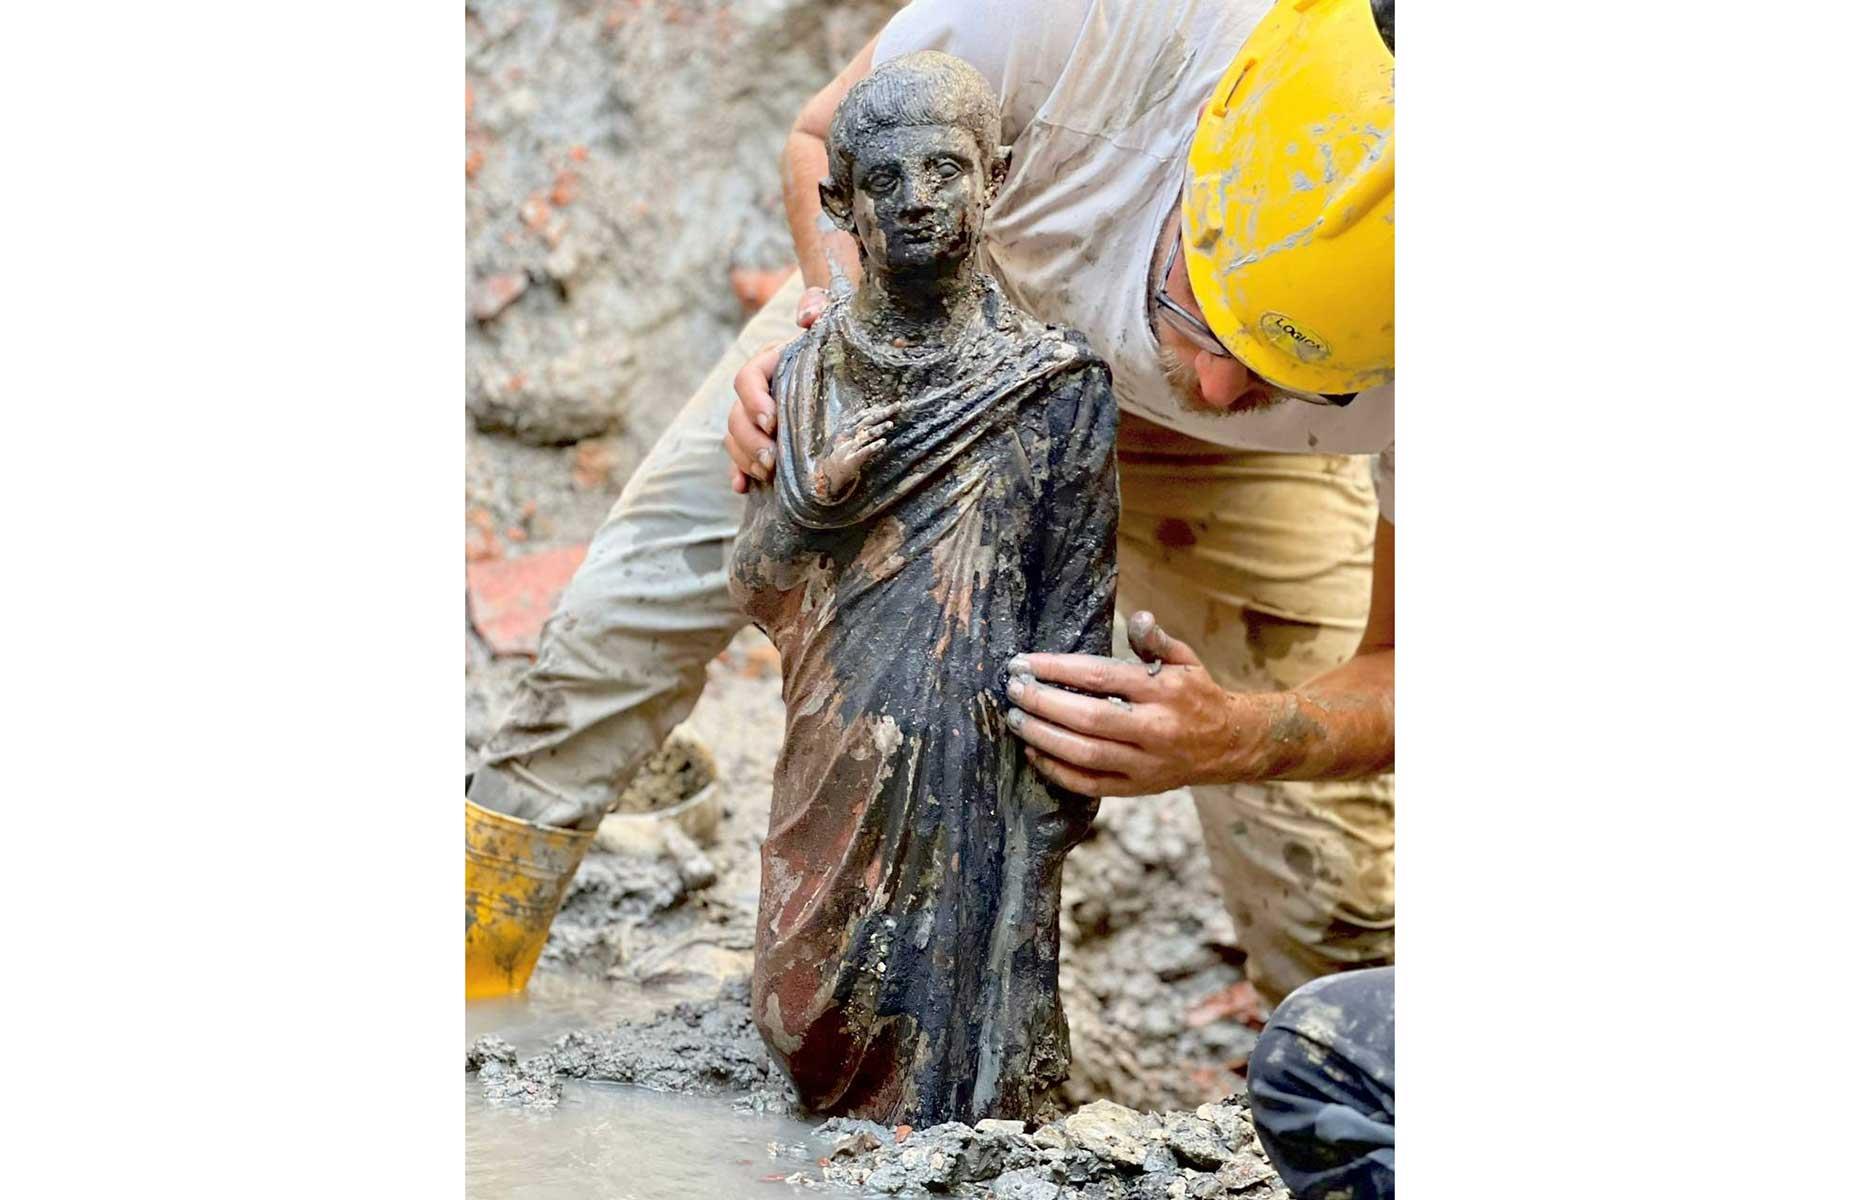 <p>A hoard of 24 Etruscan and Roman bronze statues have been unearthed by archaeologists digging in an ancient religious sanctuary near the village of San Casciano dei Bagni. <a href="https://www.telegraph.co.uk/world-news/2022/11/08/archeologists-italy-find-remarkable-hoard-ancient-bronze-statues/">Dated between the second century BC and the first century AD</a>, they depict gods and replicas of human organs, which had been tossed into the thermal waters by devotees hoping to be healed. According to a local professor, this significant find will "rewrite history", as it provides evidence that the relationship between Etruscans and Romans was closer than previously thought; the two peoples even prayed to deities together. There are plans to turn the site into an archaeological park and display the statues at a new museum. </p>  <p><a href="https://www.loveexploring.com/gallerylist/70876/littleknown-incredible-roman-ruins-around-the-world"><strong>Check out these little-known Roman ruins around the world</strong></a></p>